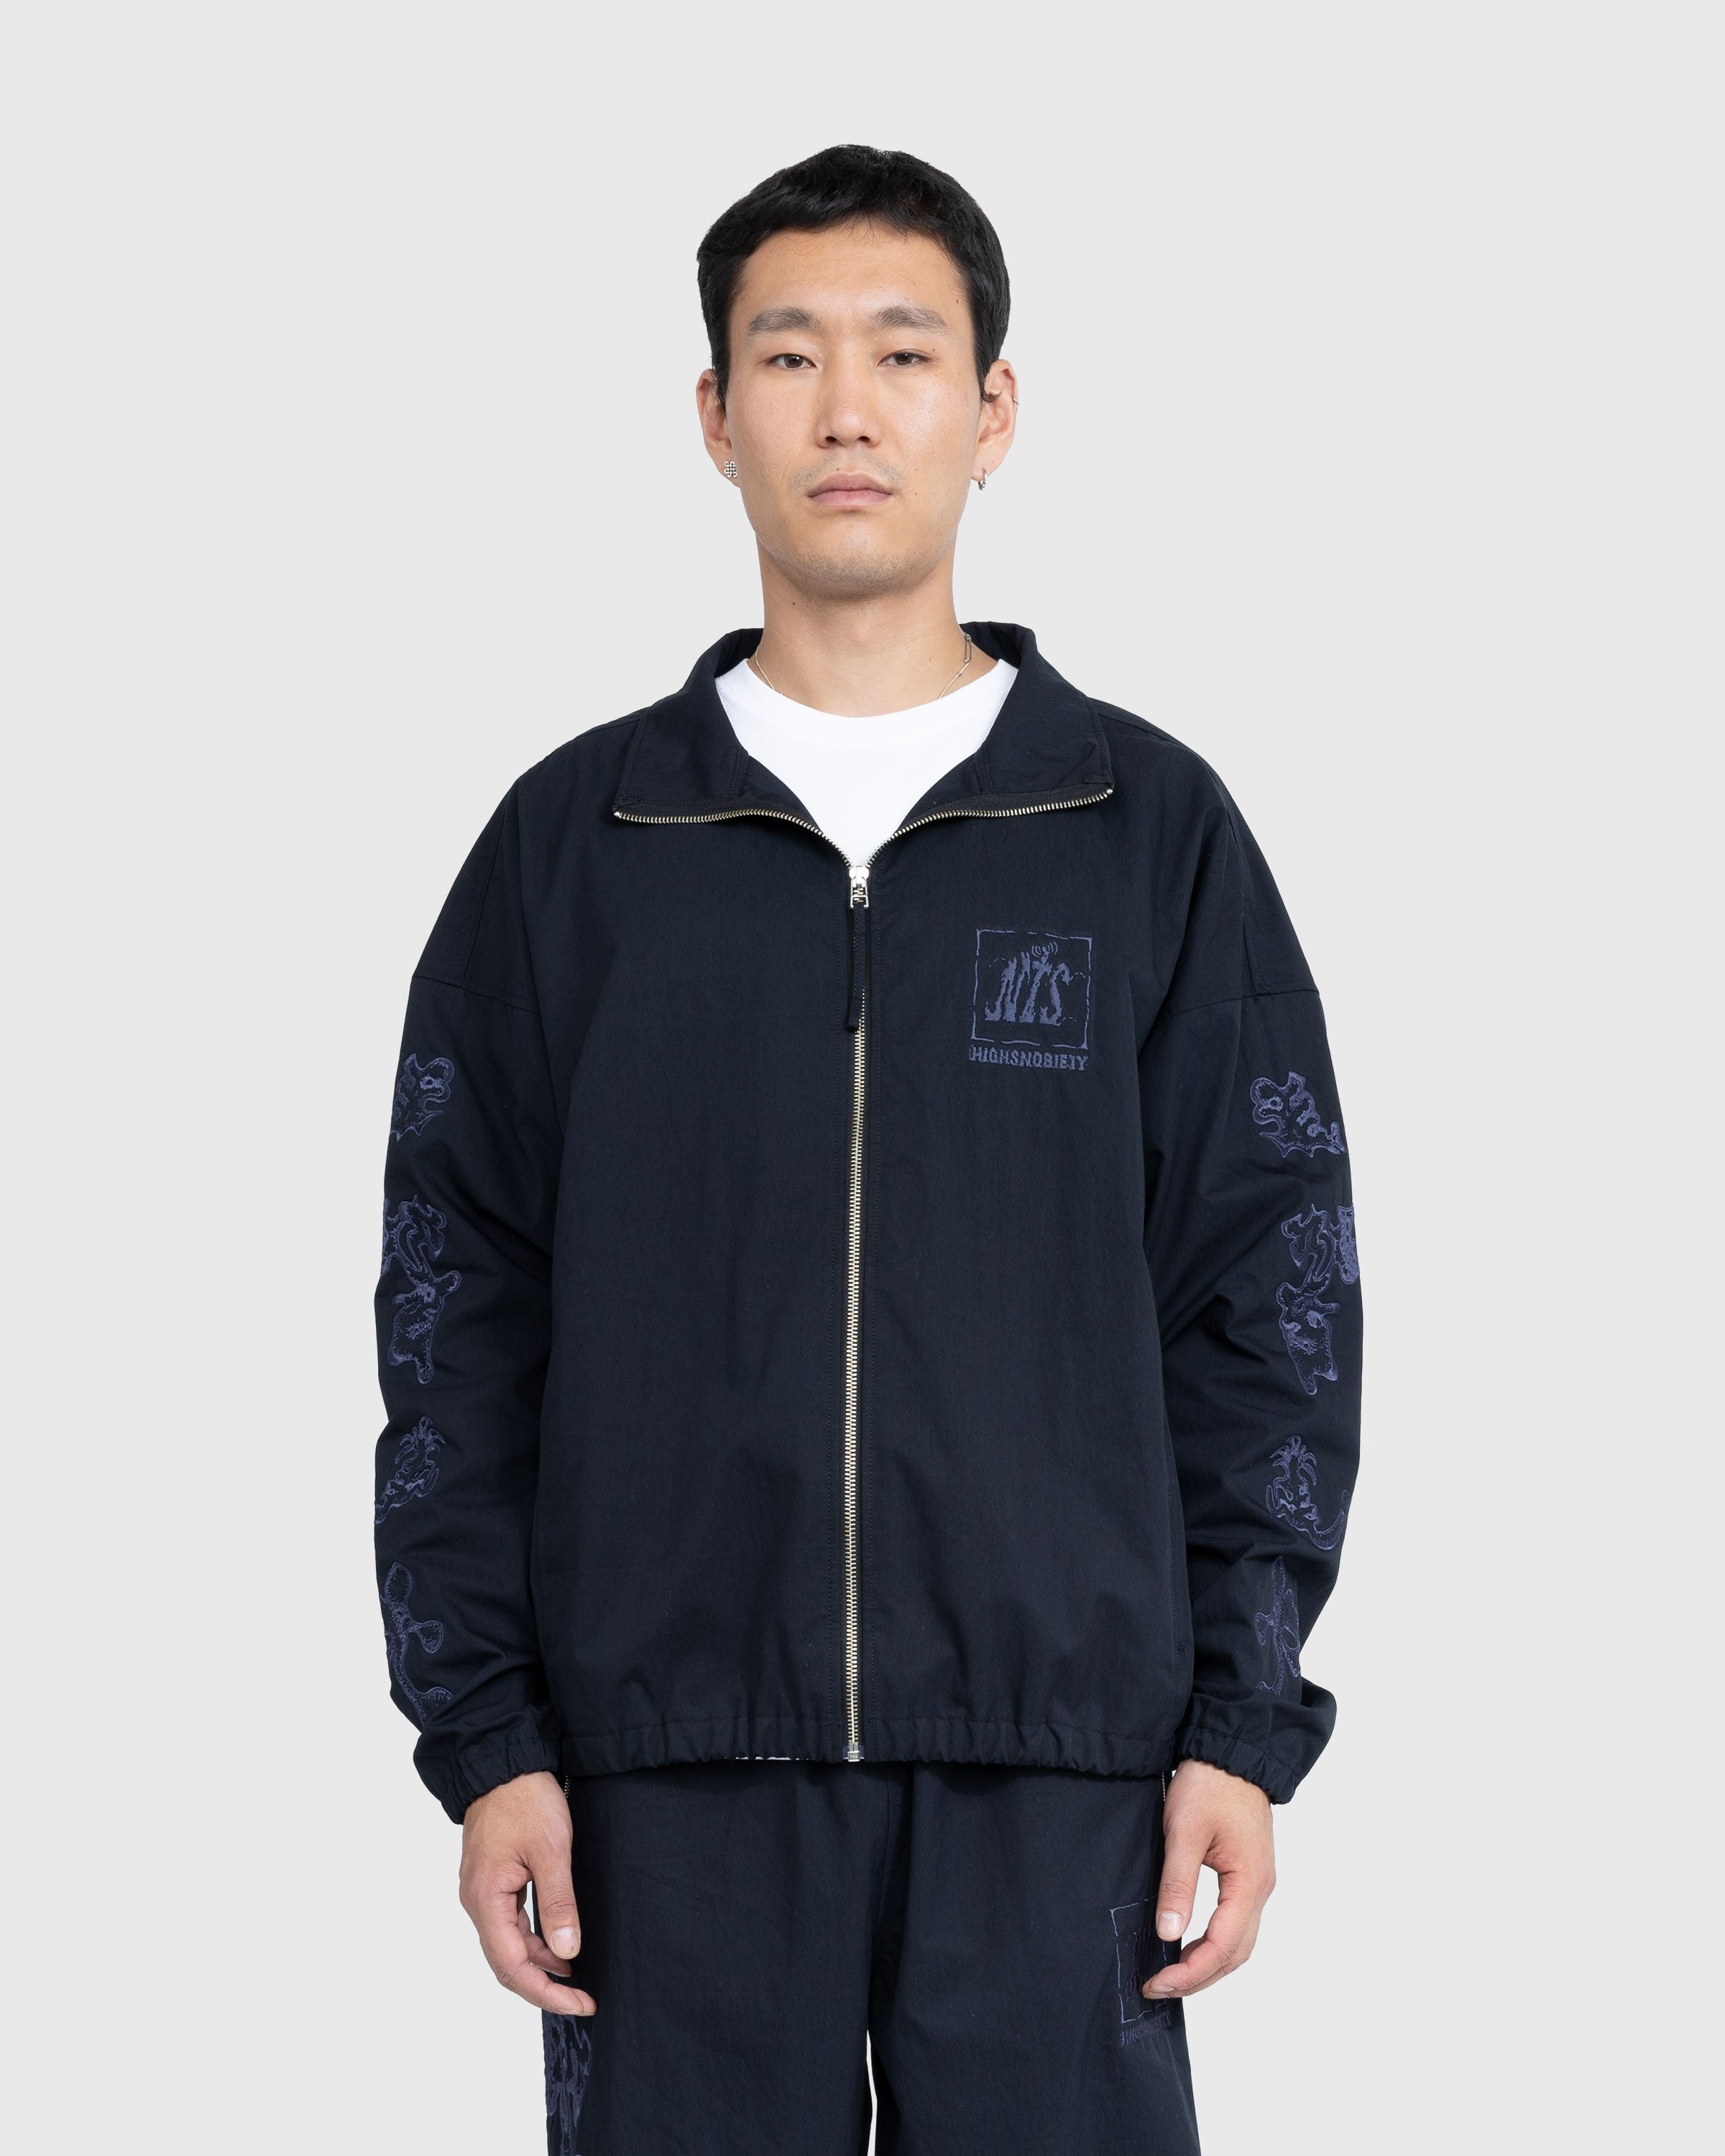 tttmsw Water proof nylon track jacket XL変更しておきました 